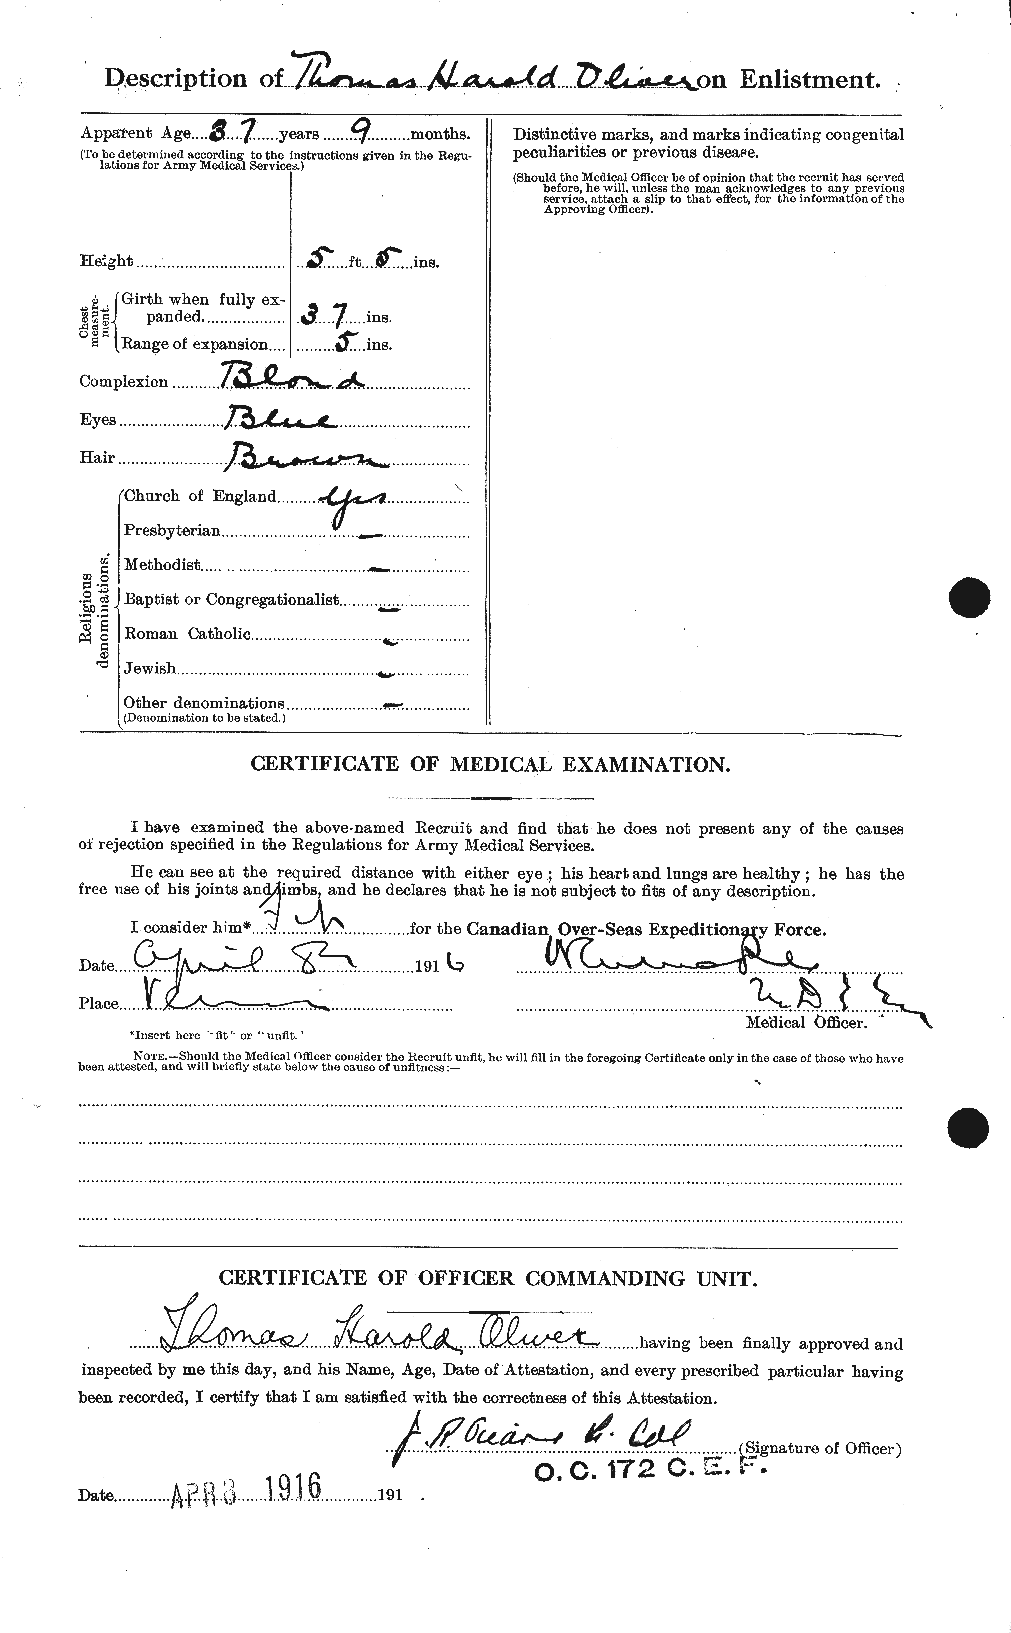 Personnel Records of the First World War - CEF 200523b